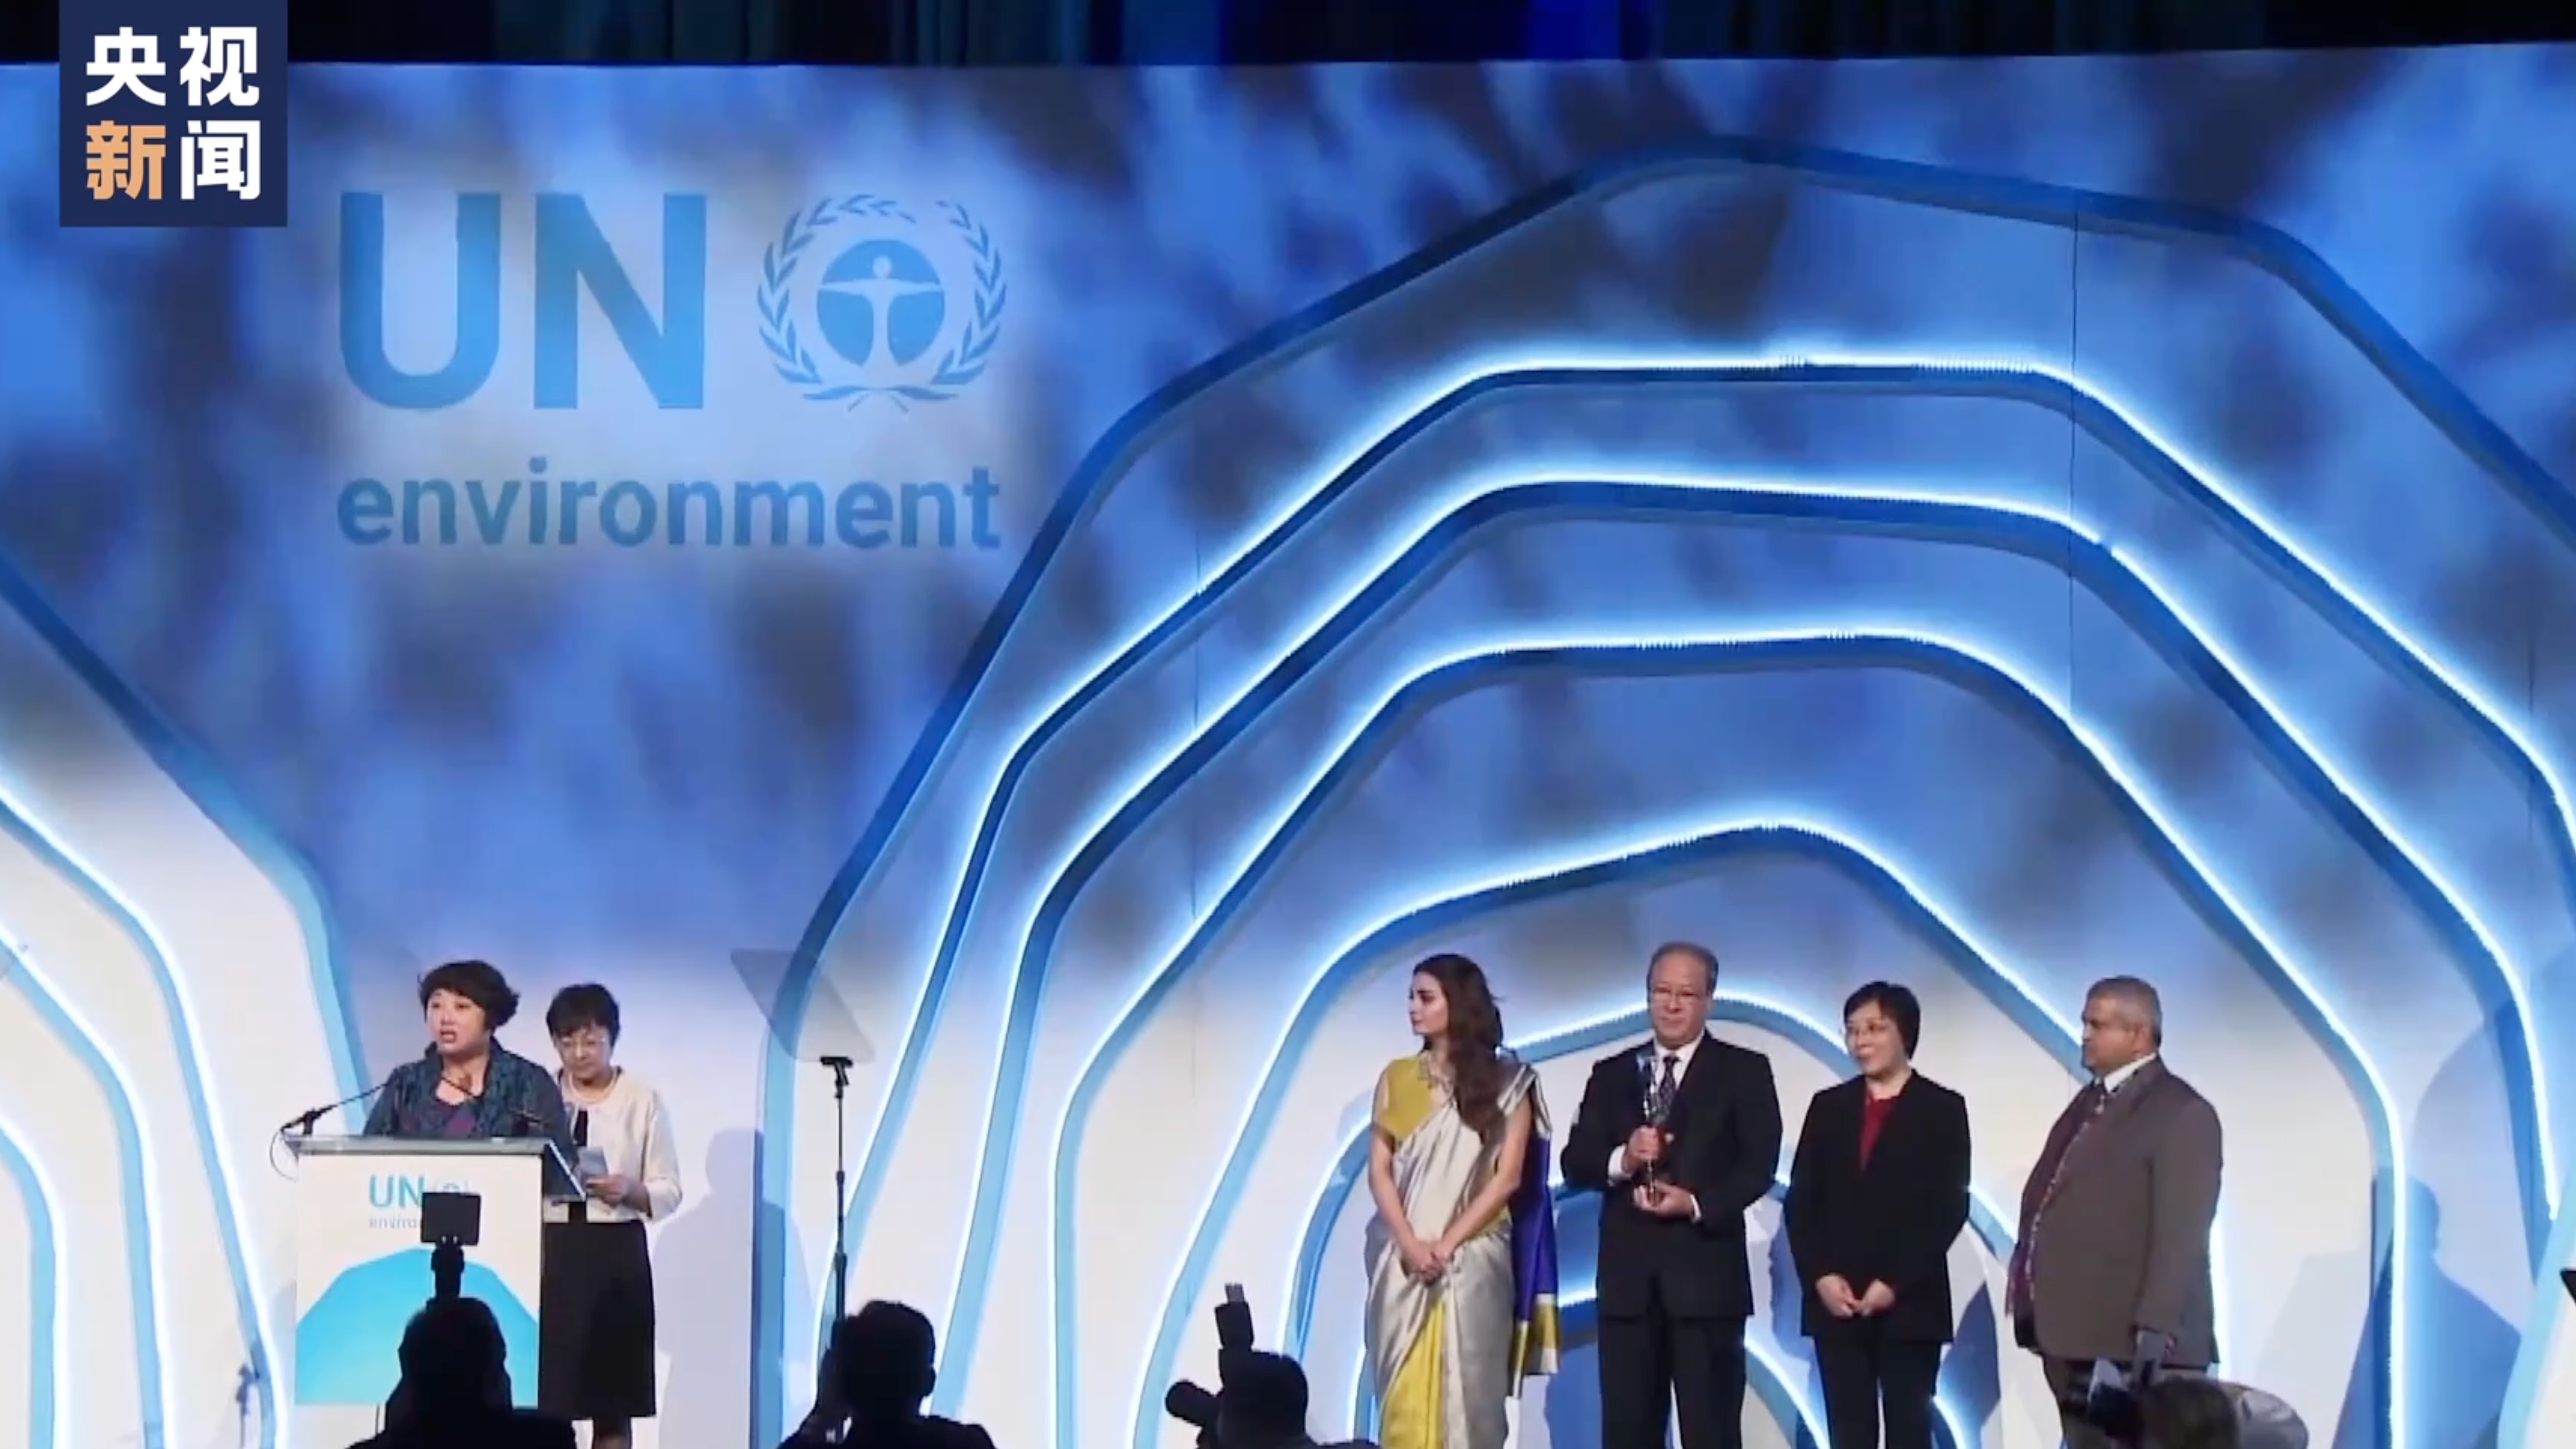 Qiu Liqin expressed her excitement when receiving the Champions of the Earth Award for Zhejiang's Green Rural Revival Program on September 27, 2018.